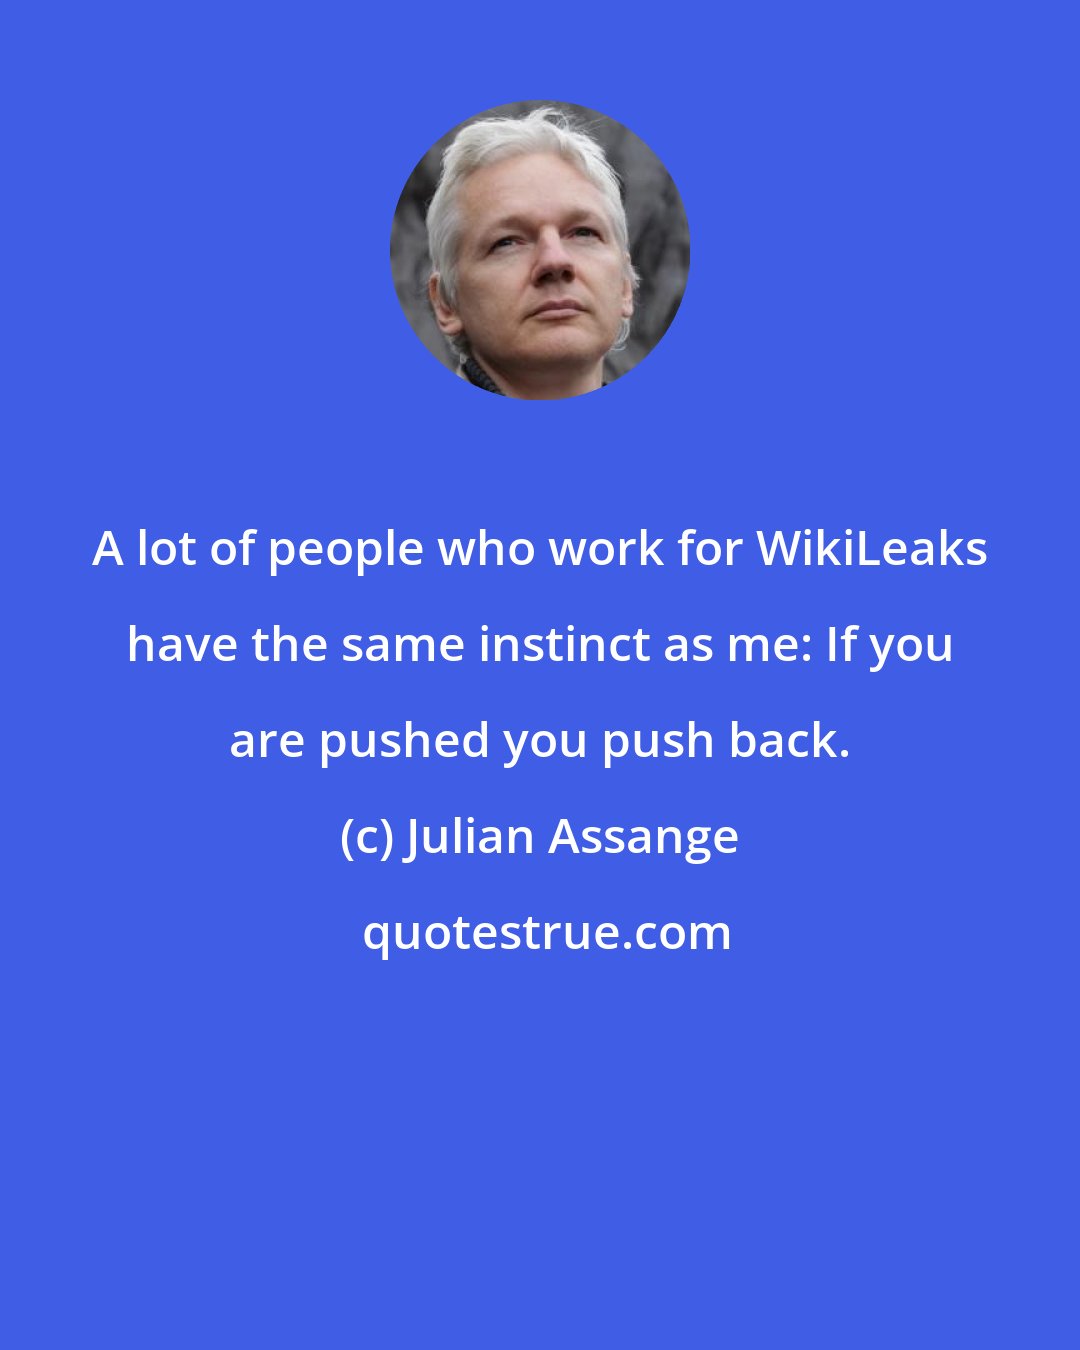 Julian Assange: A lot of people who work for WikiLeaks have the same instinct as me: If you are pushed you push back.